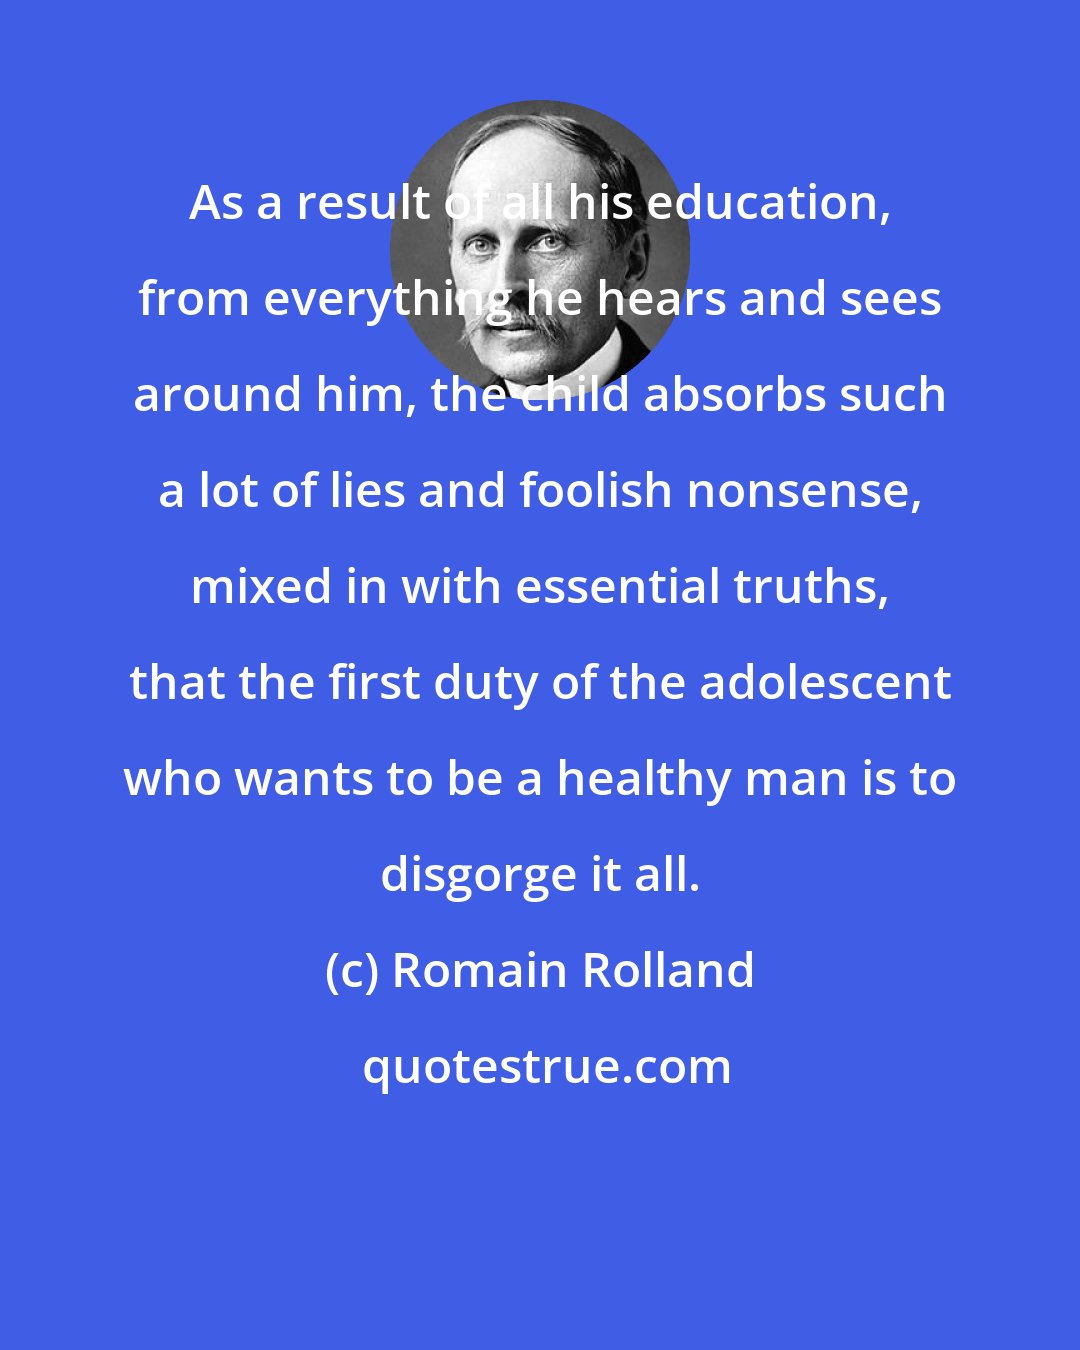 Romain Rolland: As a result of all his education, from everything he hears and sees around him, the child absorbs such a lot of lies and foolish nonsense, mixed in with essential truths, that the first duty of the adolescent who wants to be a healthy man is to disgorge it all.